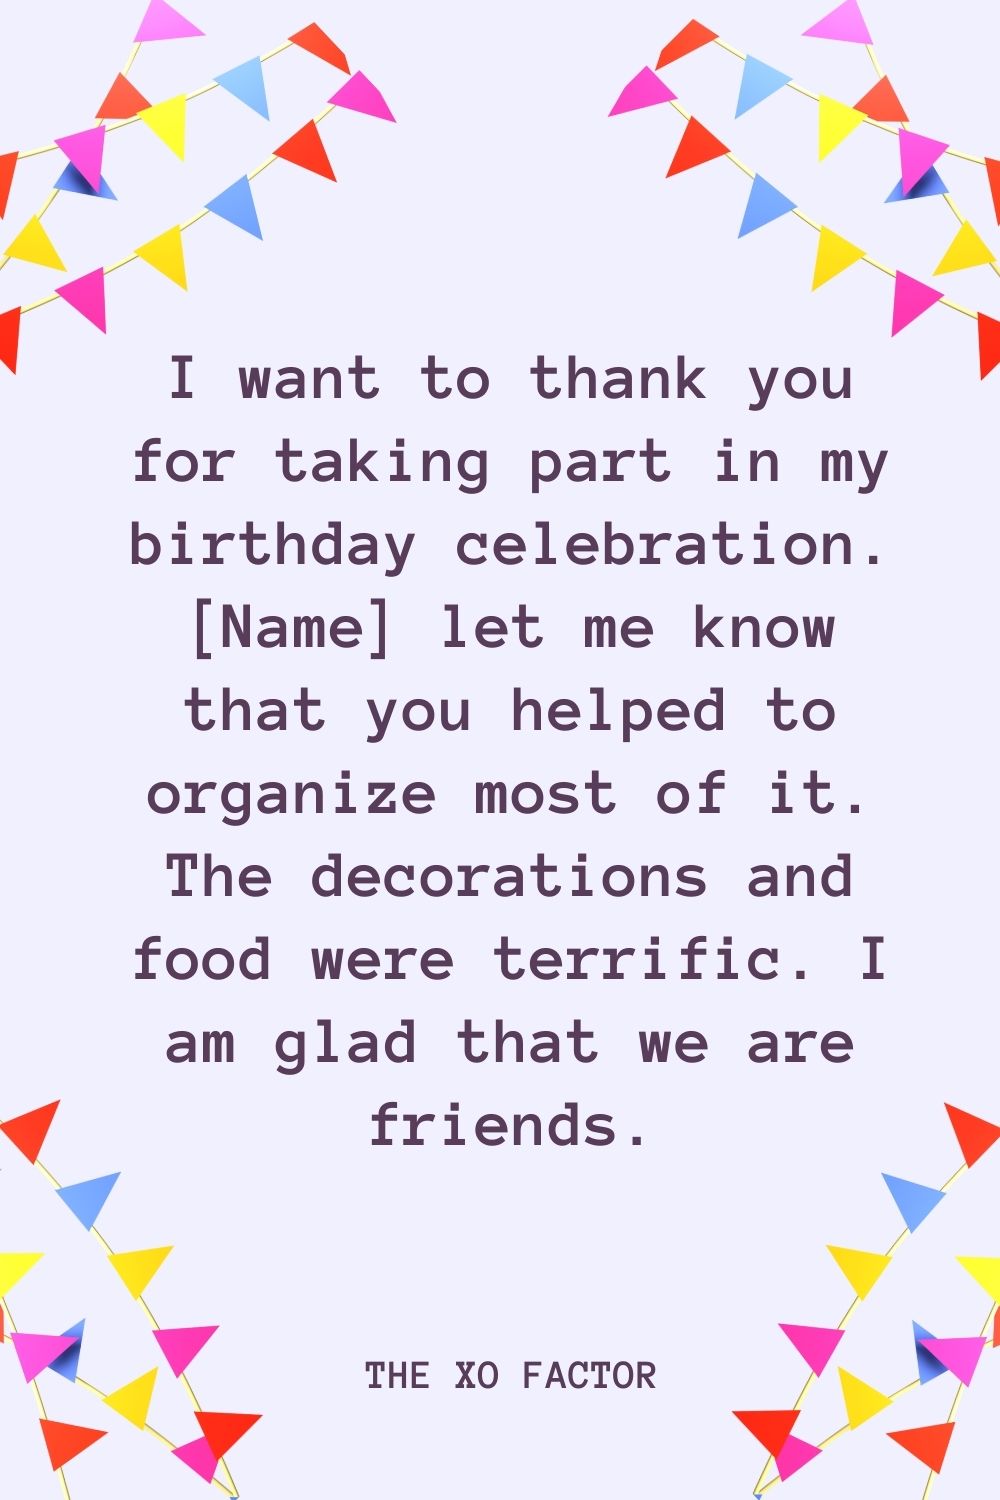 I want to thank you for taking part in my birthday celebration. [Name] let me know that you helped to organize most of it. The decorations and food were terrific. I am glad that we are friends.